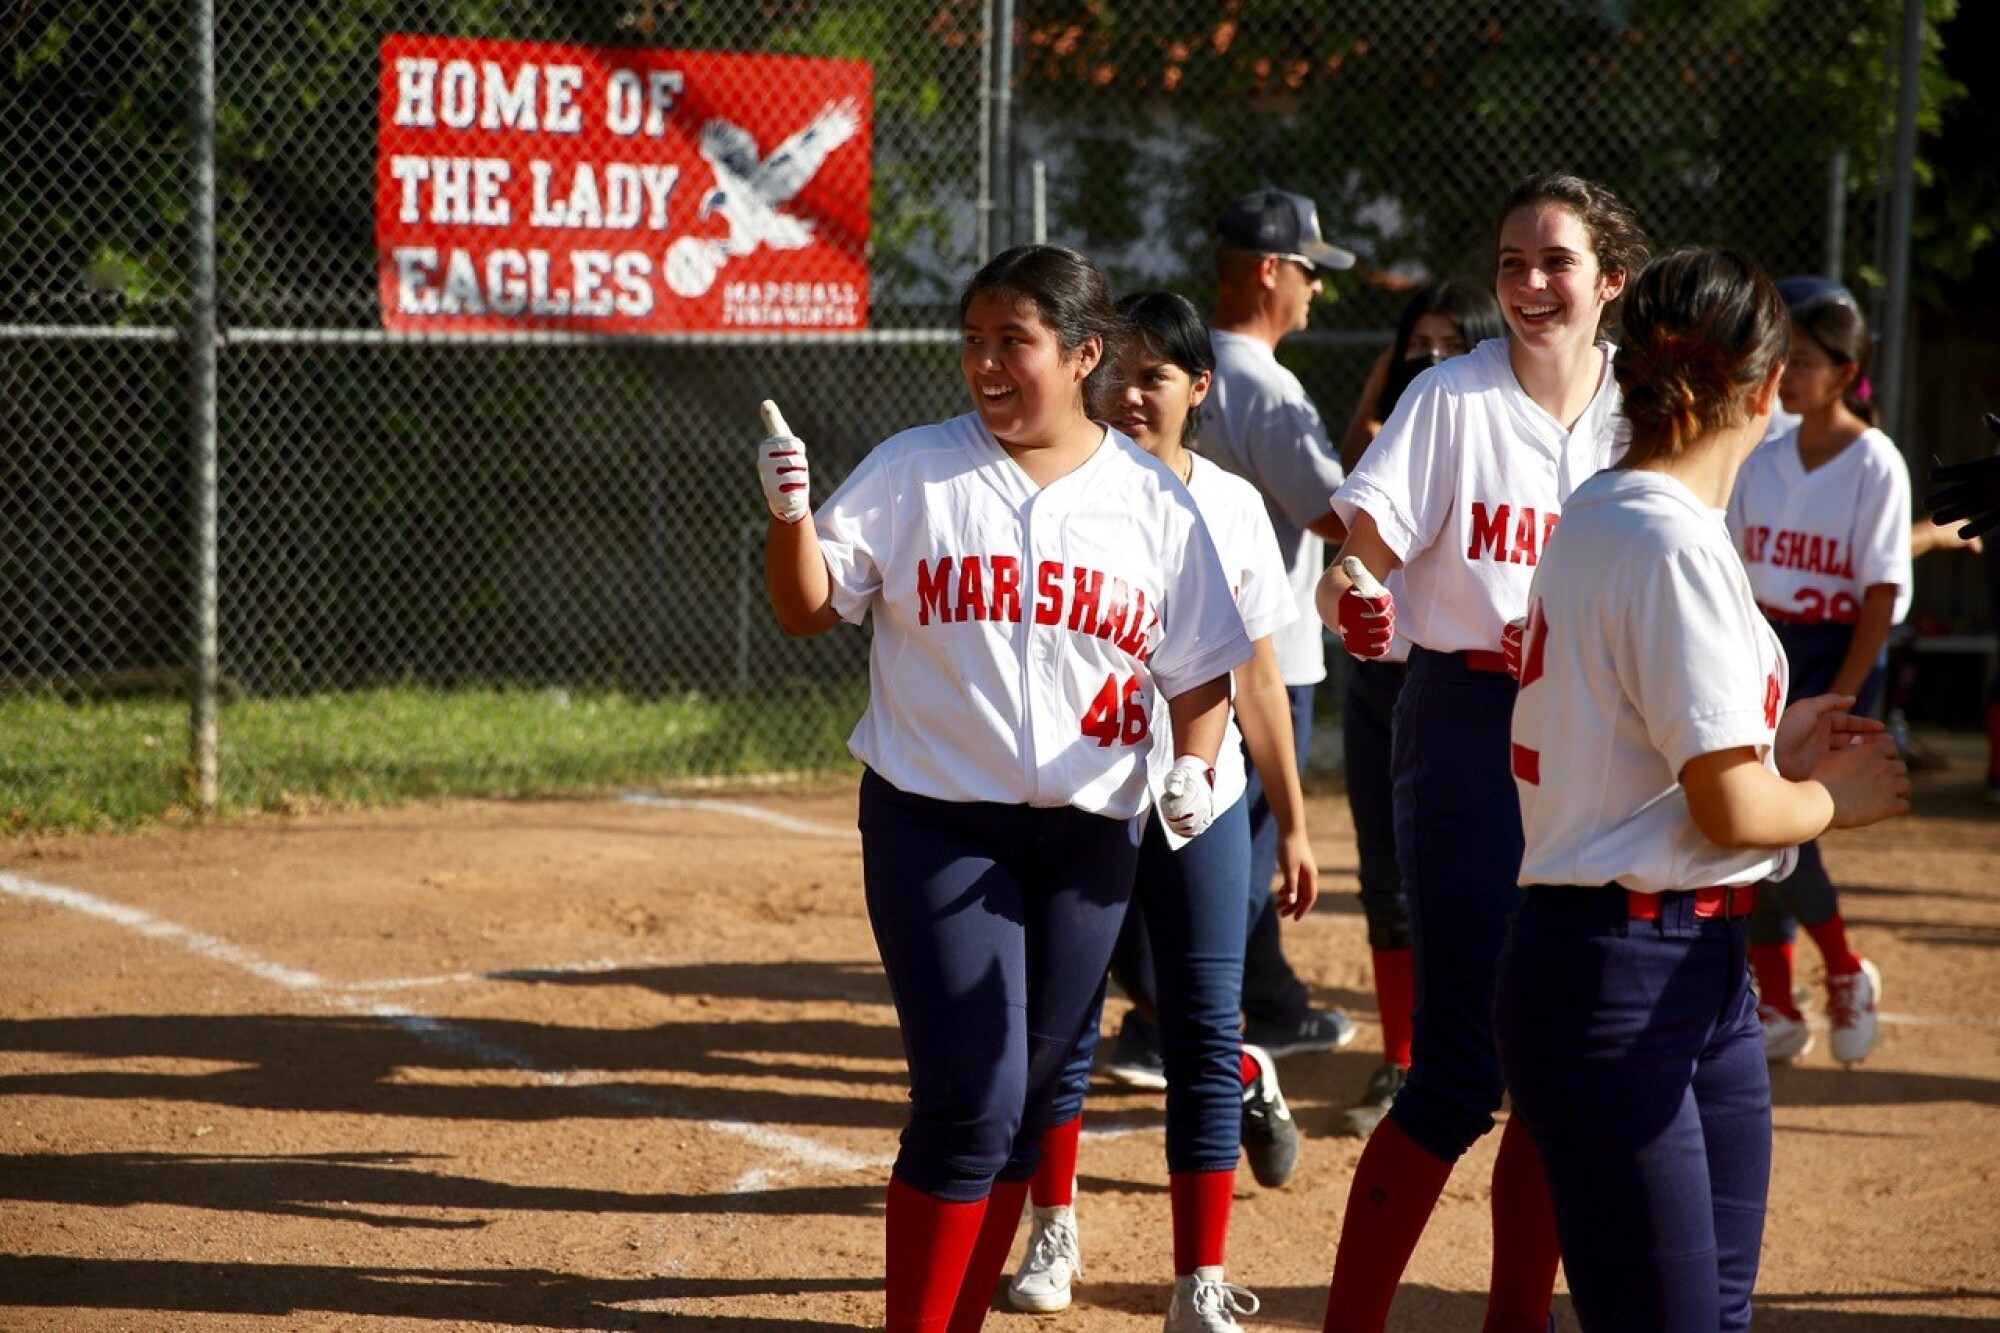 Marshall junior Desiree Lopez gives the thumbs-up to the opposing team.